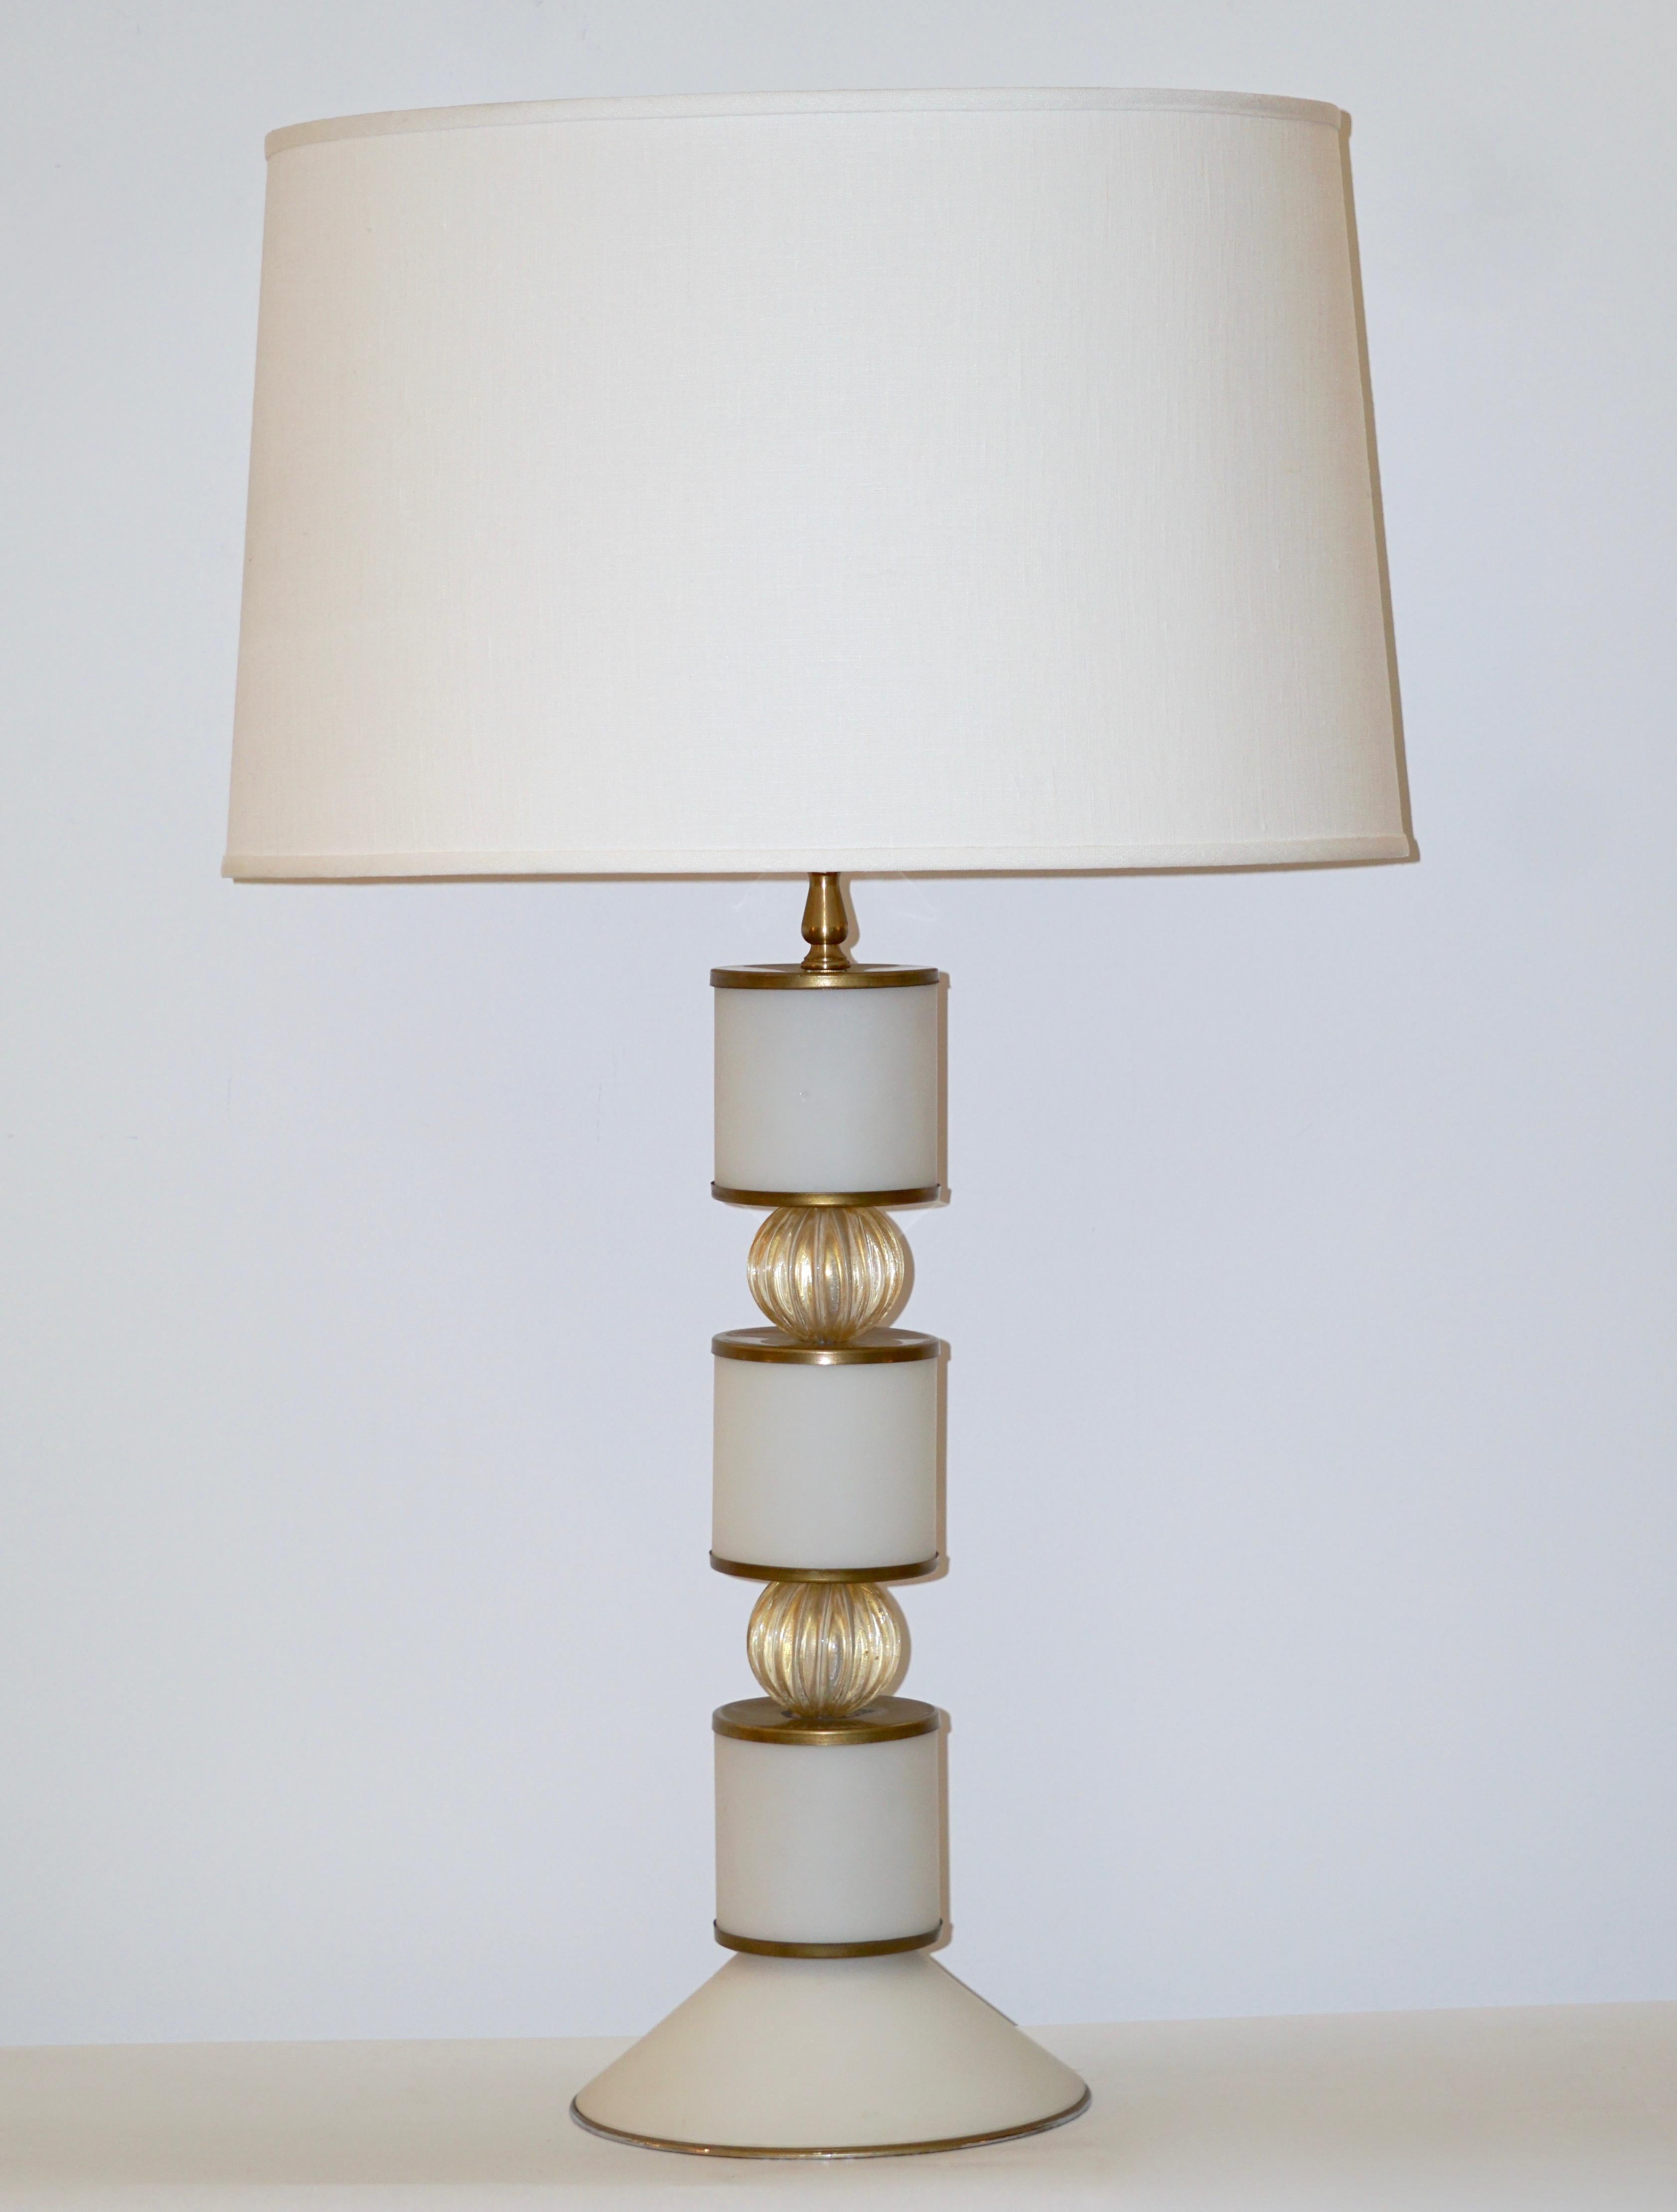 Albarelli Pair of Tall Matte White and Gold Murano Glass Lamps, circa 1960 For Sale 8